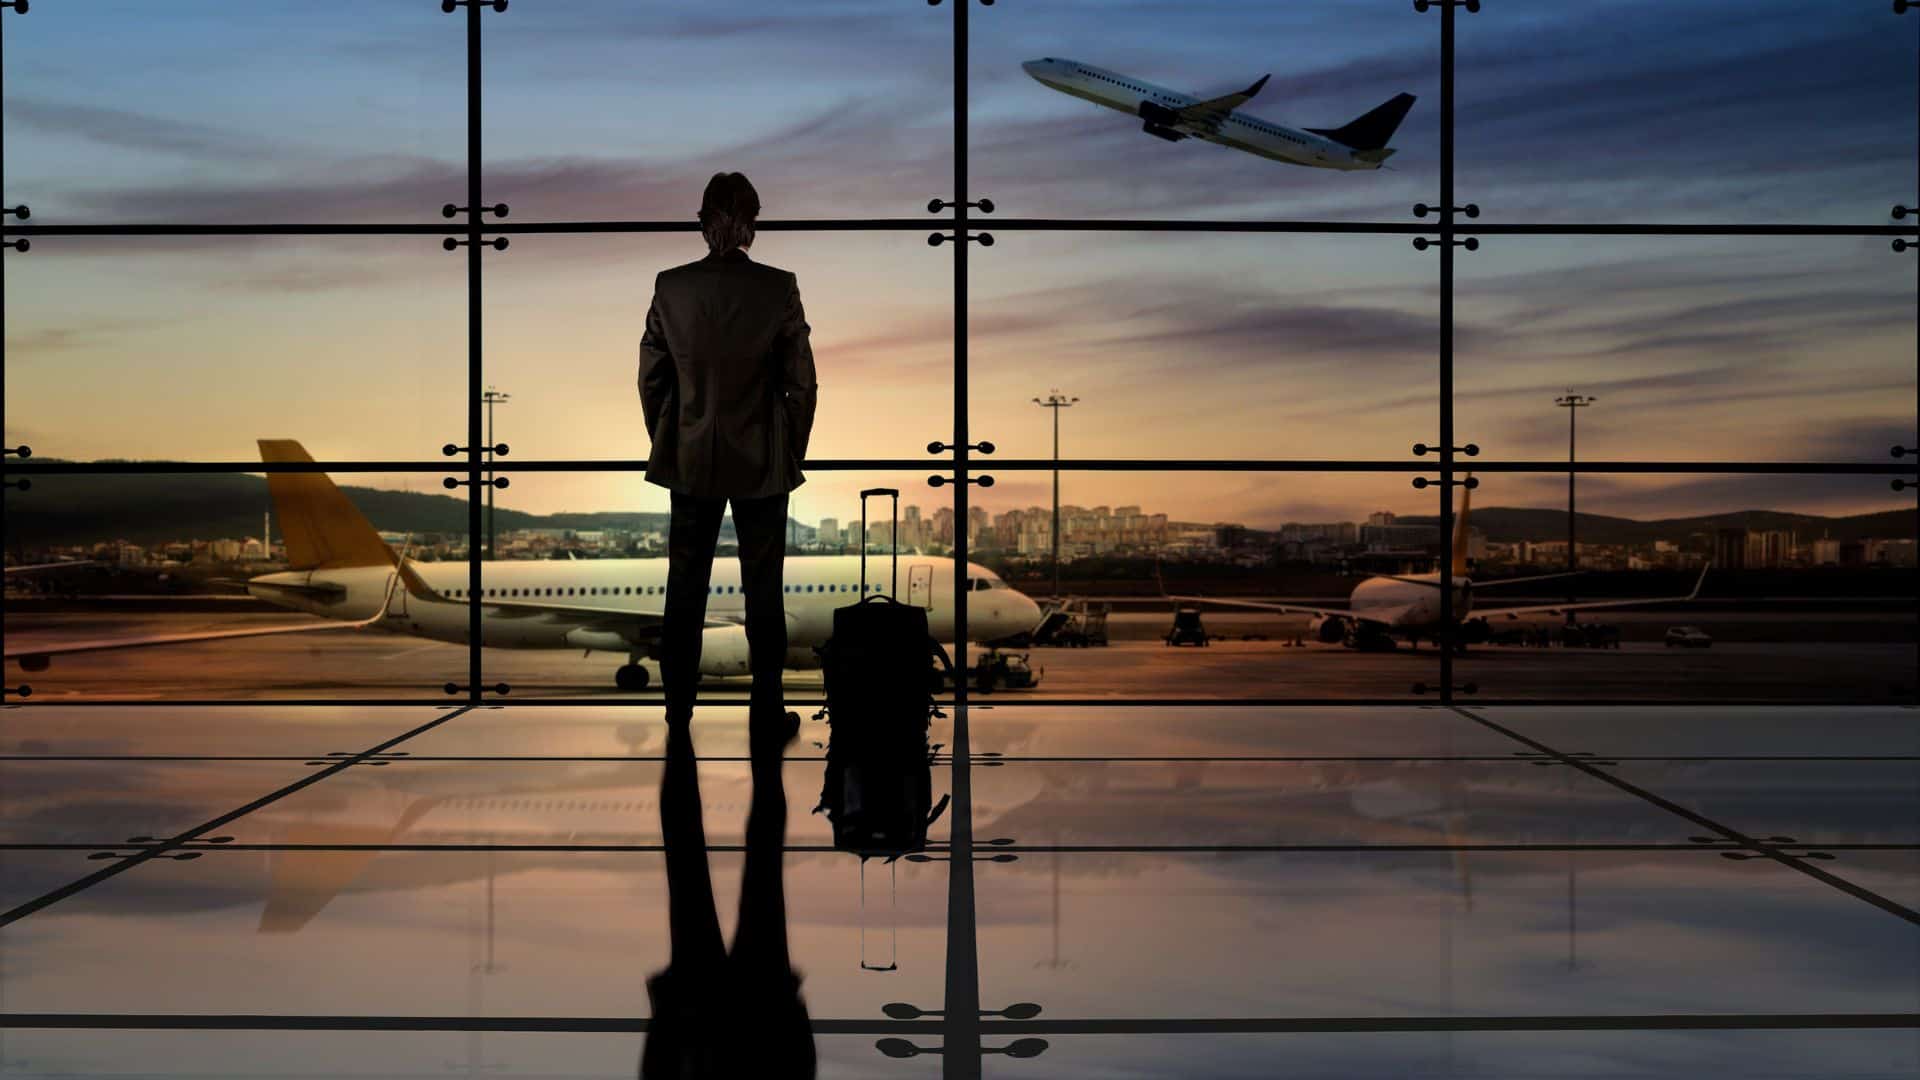 Businessman looking out from an airport at a plane taking off.